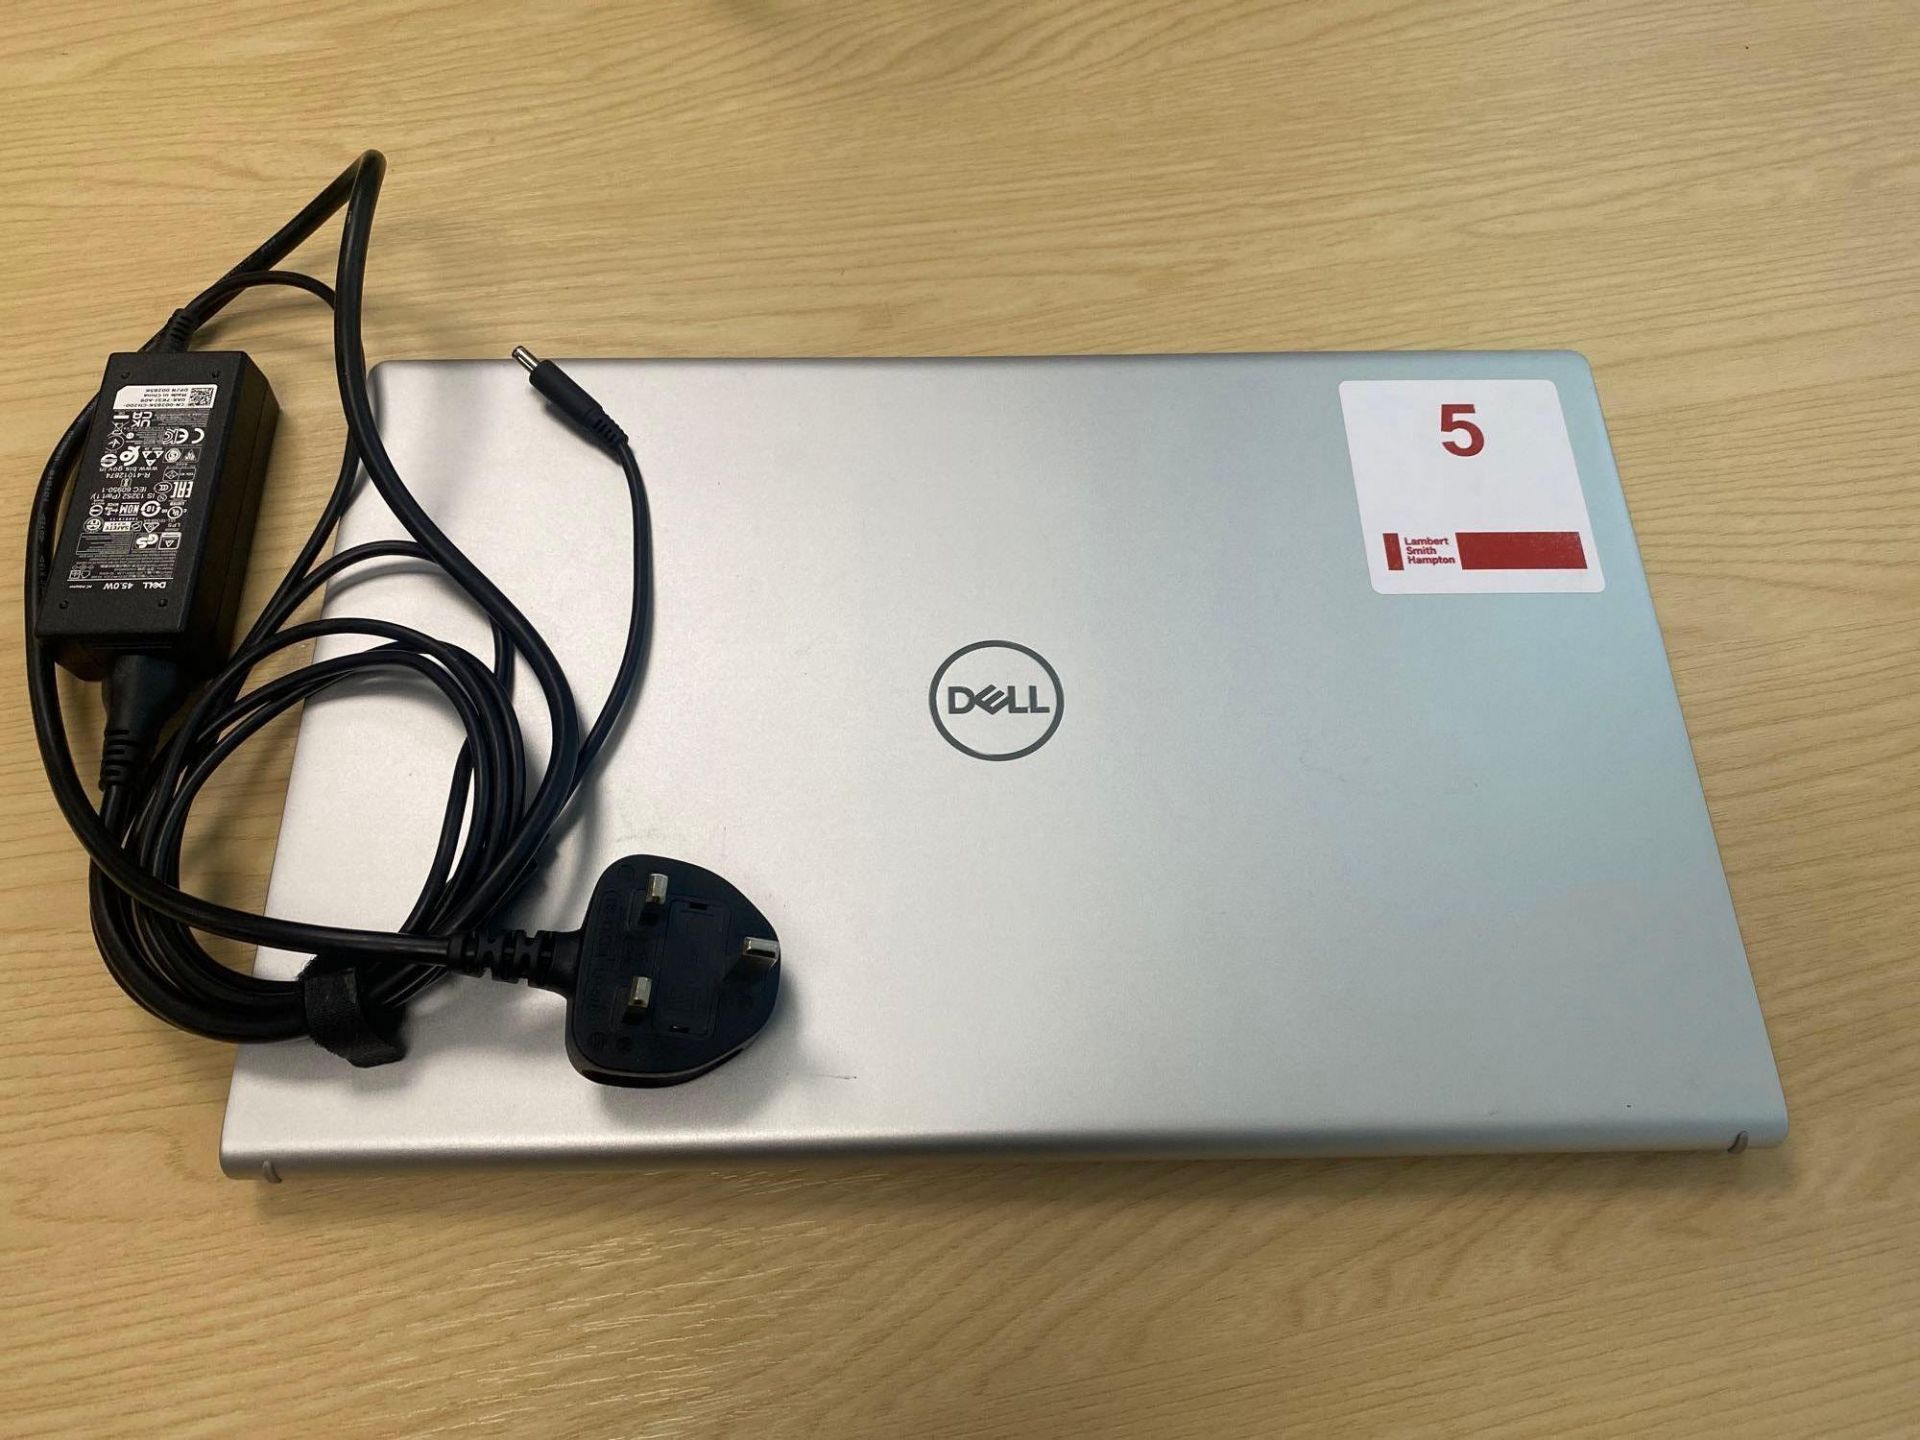 Dell Inspiron series, 15” laptop with i7 processor complete with charger, model P106F - Image 5 of 5